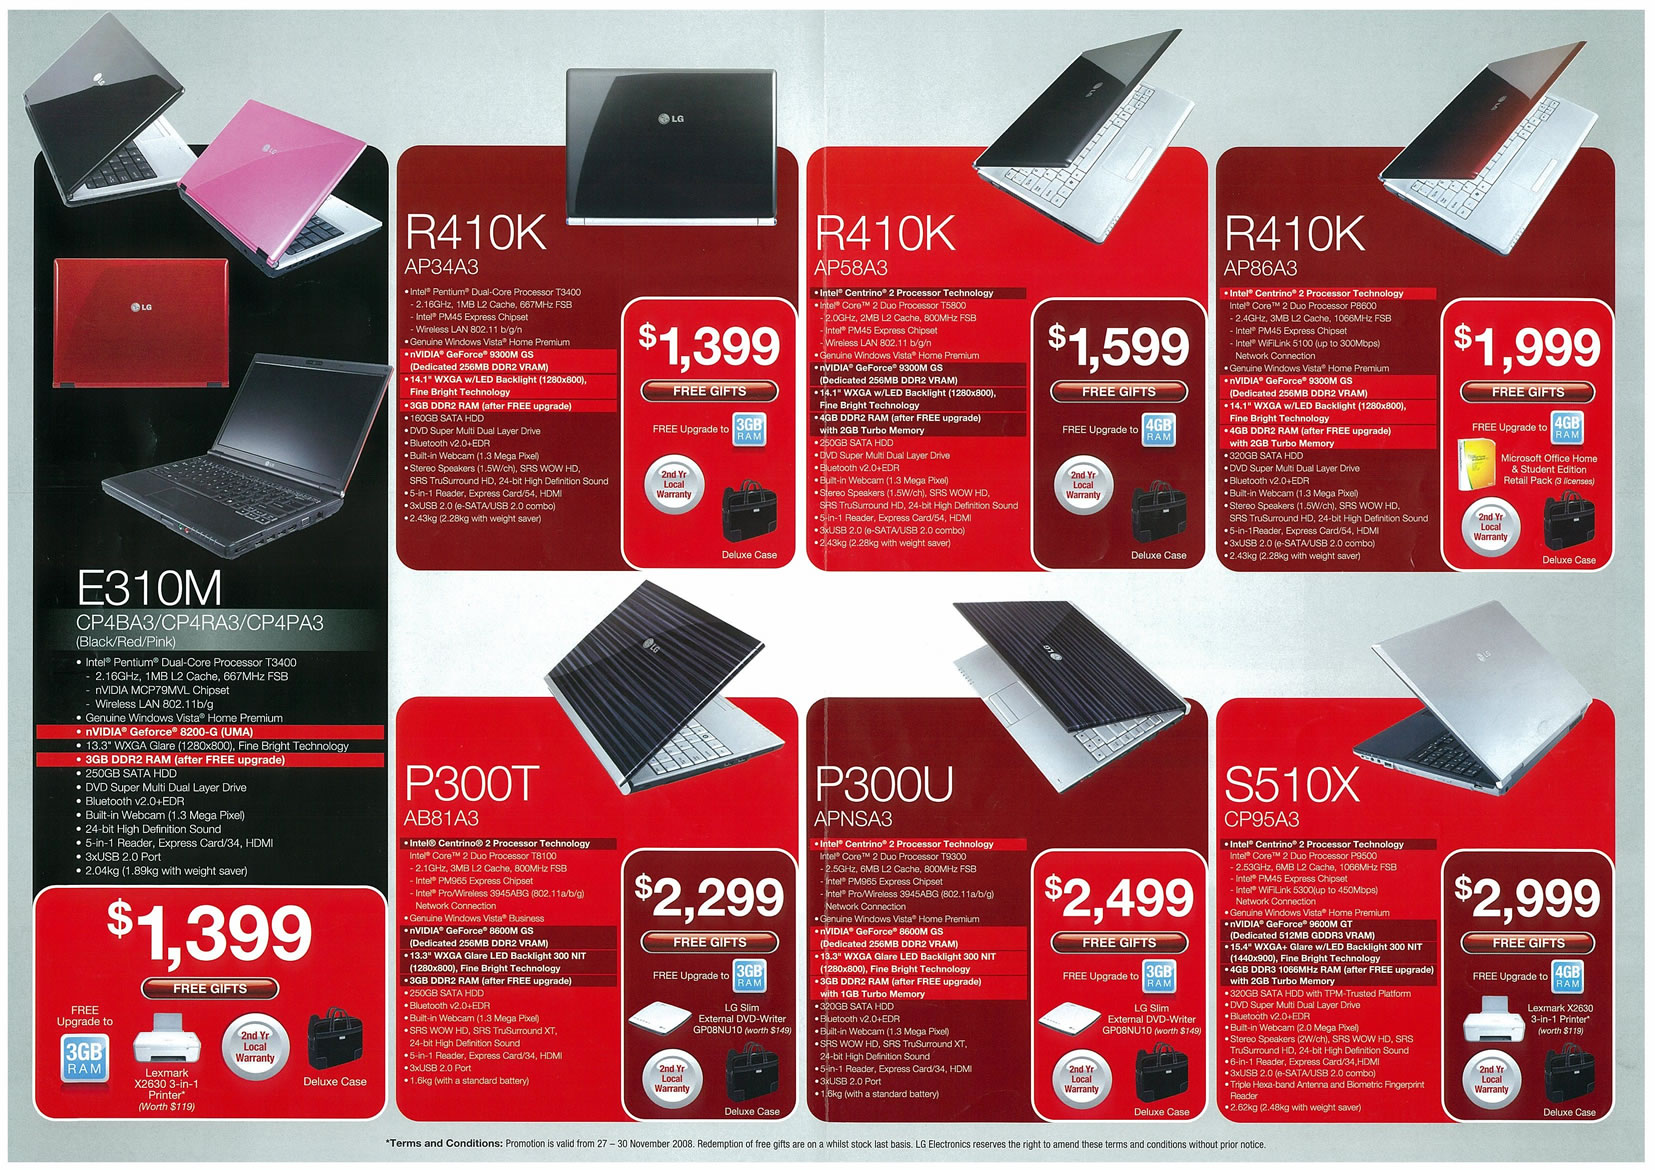 Sitex 2008 price list image brochure of LG Notebooks 01 Page 2 - Vr-zone Tclong